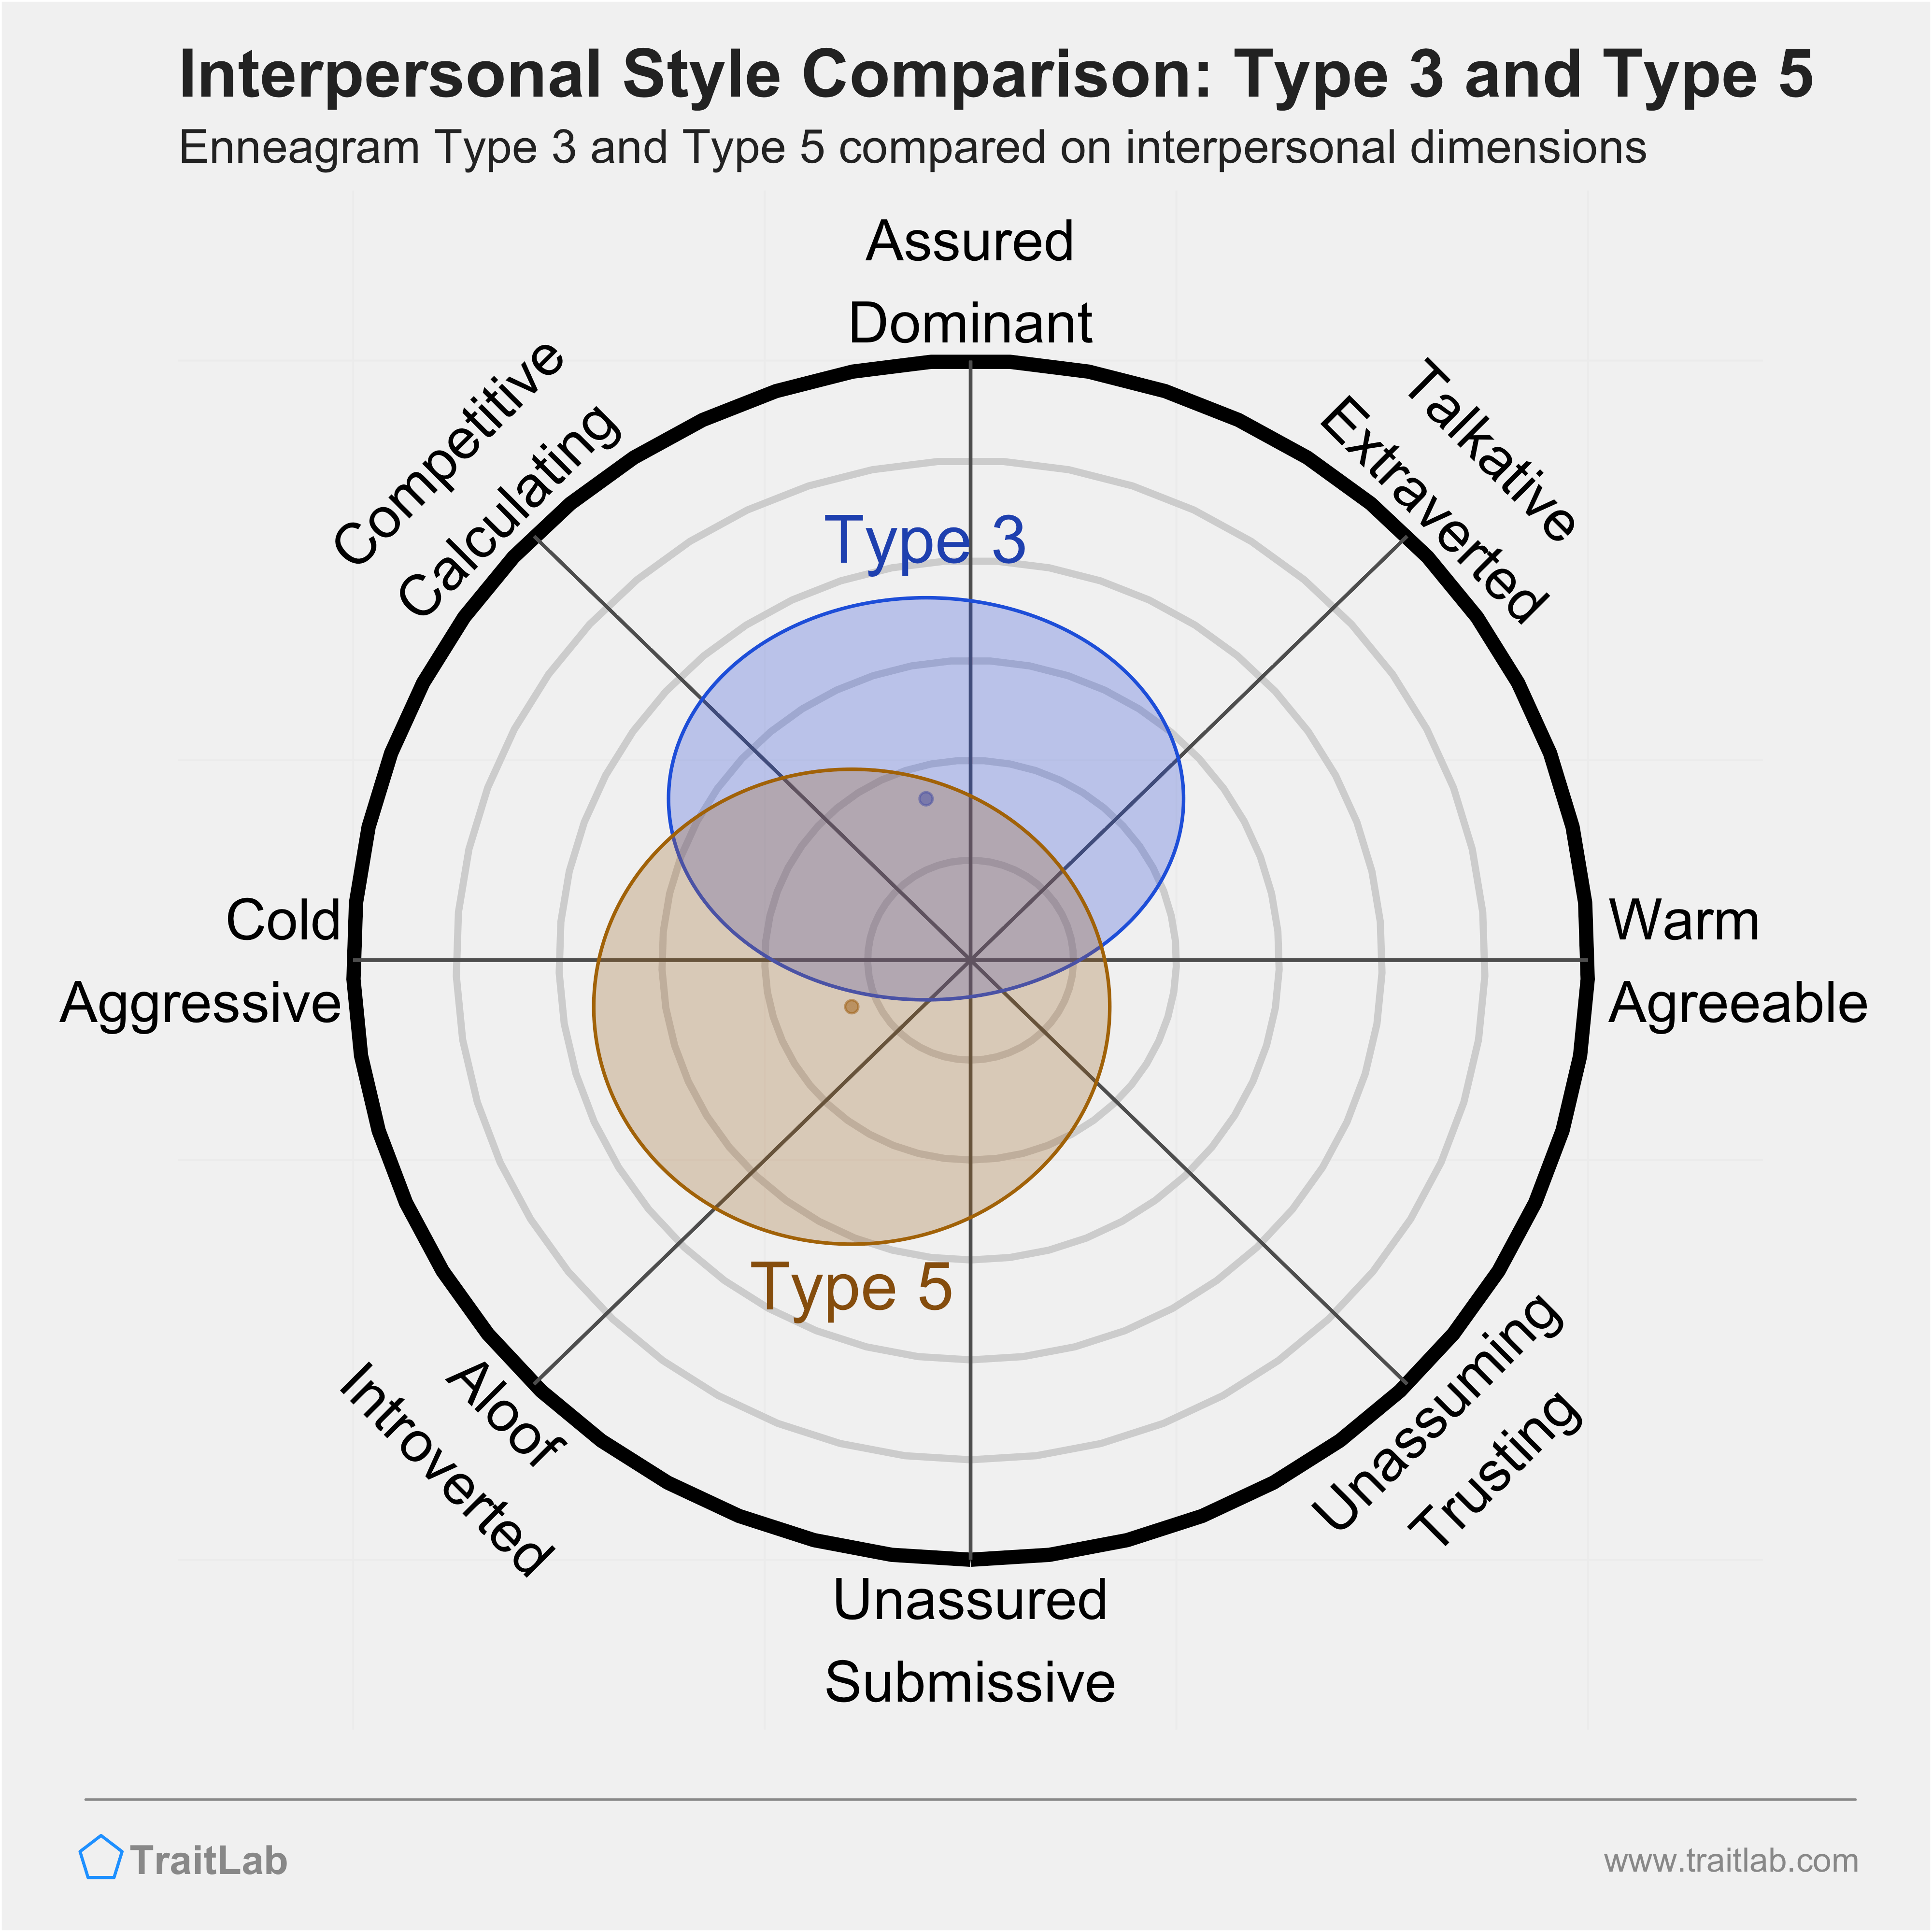 Enneagram Type 3 and Type 5 comparison across interpersonal dimensions